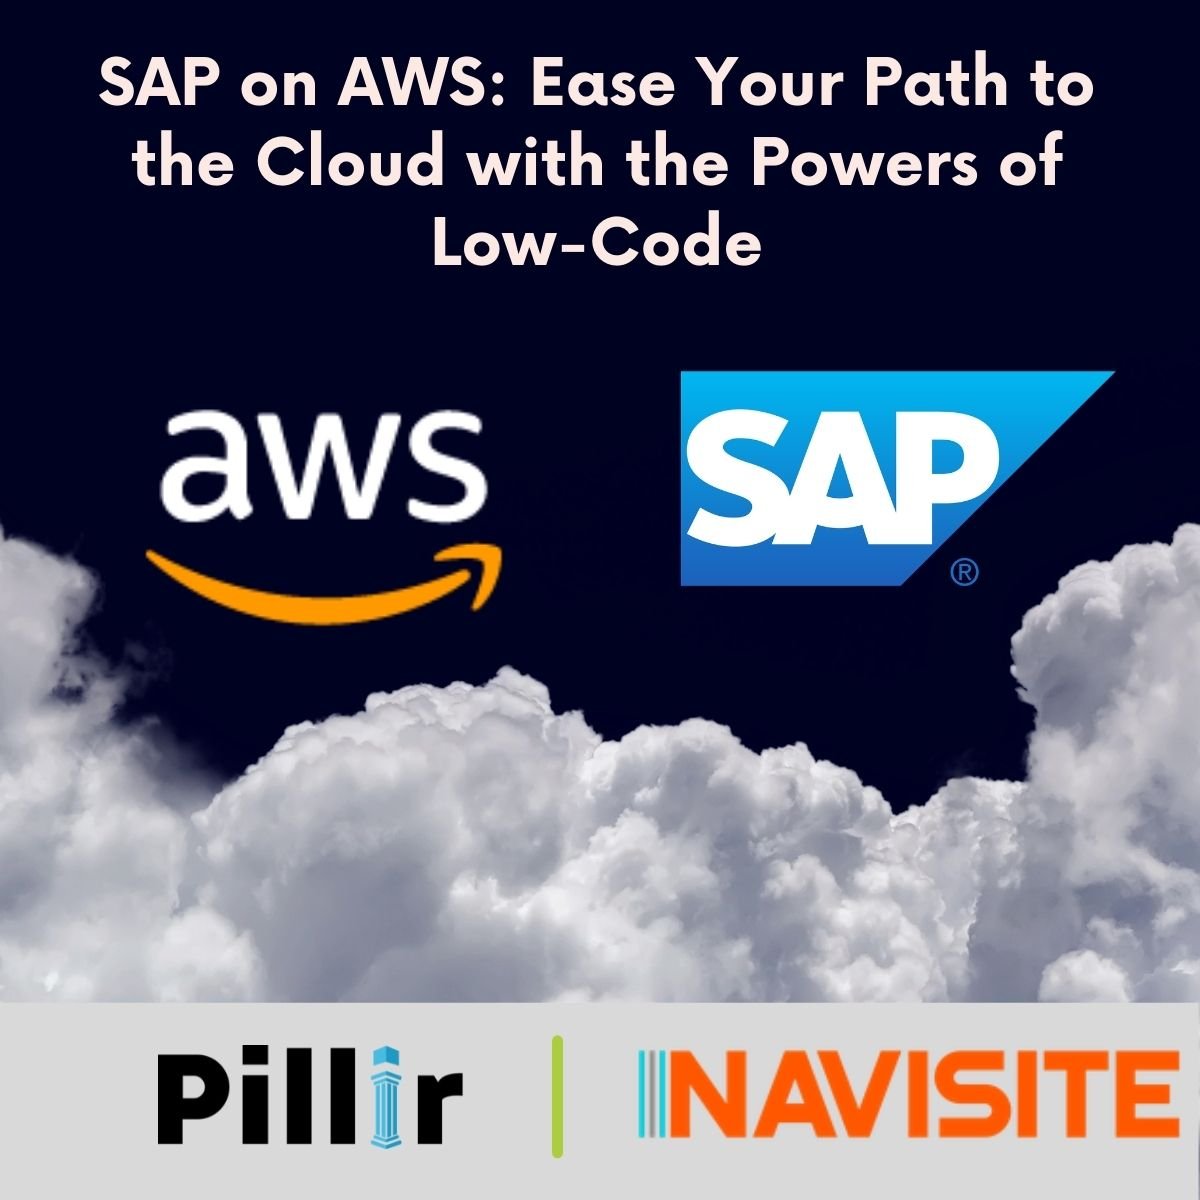 SAP on AWS Ease Your Path to the Cloud with the Powers of Low-Code